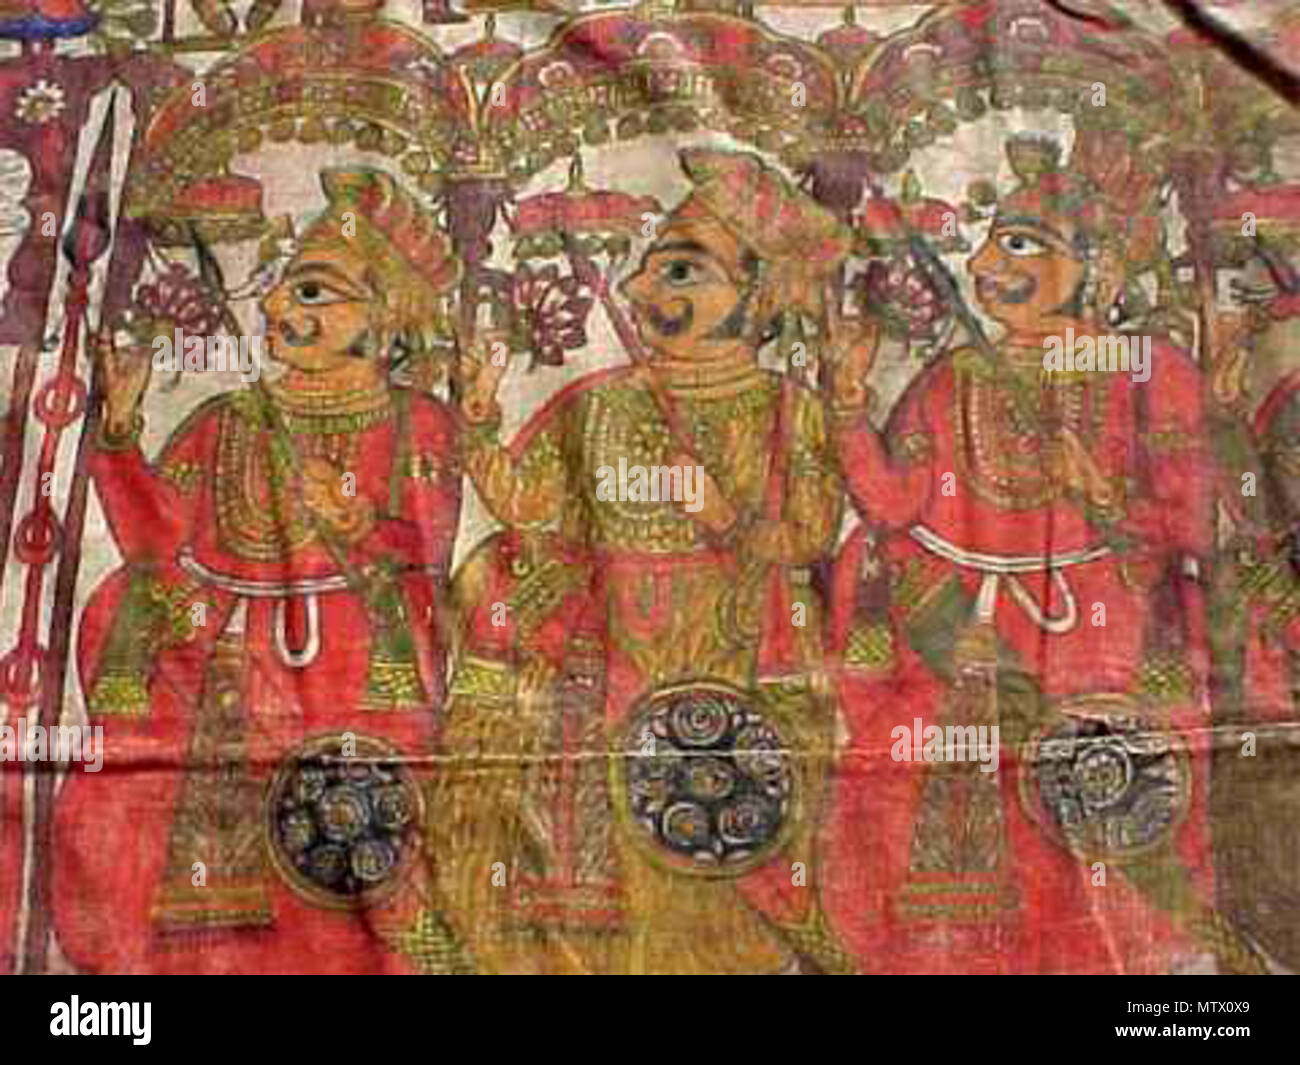 . English: A series of images of another par of Pabuji, this one from the early 19th century Source: ebay, April 2002 'This is an old (mid 1800s or earlier) Par. The painted textile is approximately 16 feet long and 55 1/2 inches wide. The story painting has been used to relay the story many times through the years and shows normal wear, especially on the bottom edge. There are some old repairs. The textile is made of two narrow pieces ( 26 3/4') sewen together. It appears to be an old linen-type material.' . early 19th century. Unknown 462 Pabuji2f Stock Photo